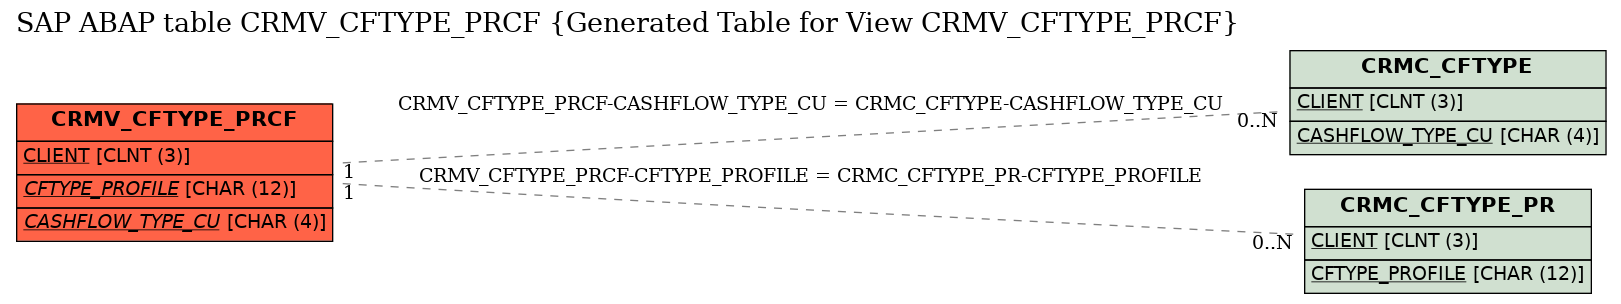 E-R Diagram for table CRMV_CFTYPE_PRCF (Generated Table for View CRMV_CFTYPE_PRCF)